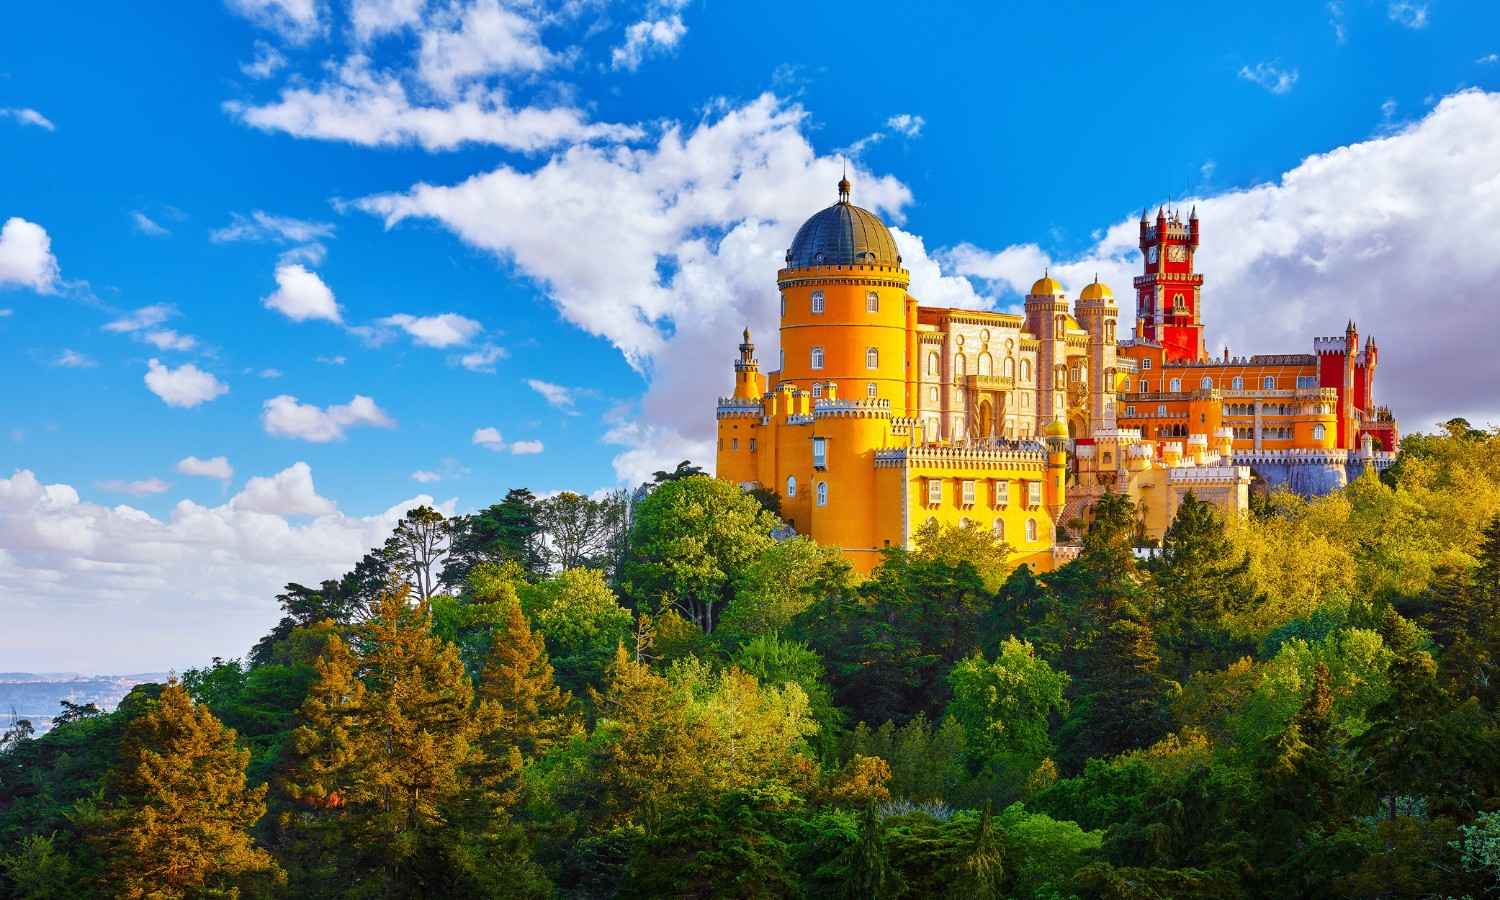 You can't spend 7 days in Portugal without visiting Sintra.